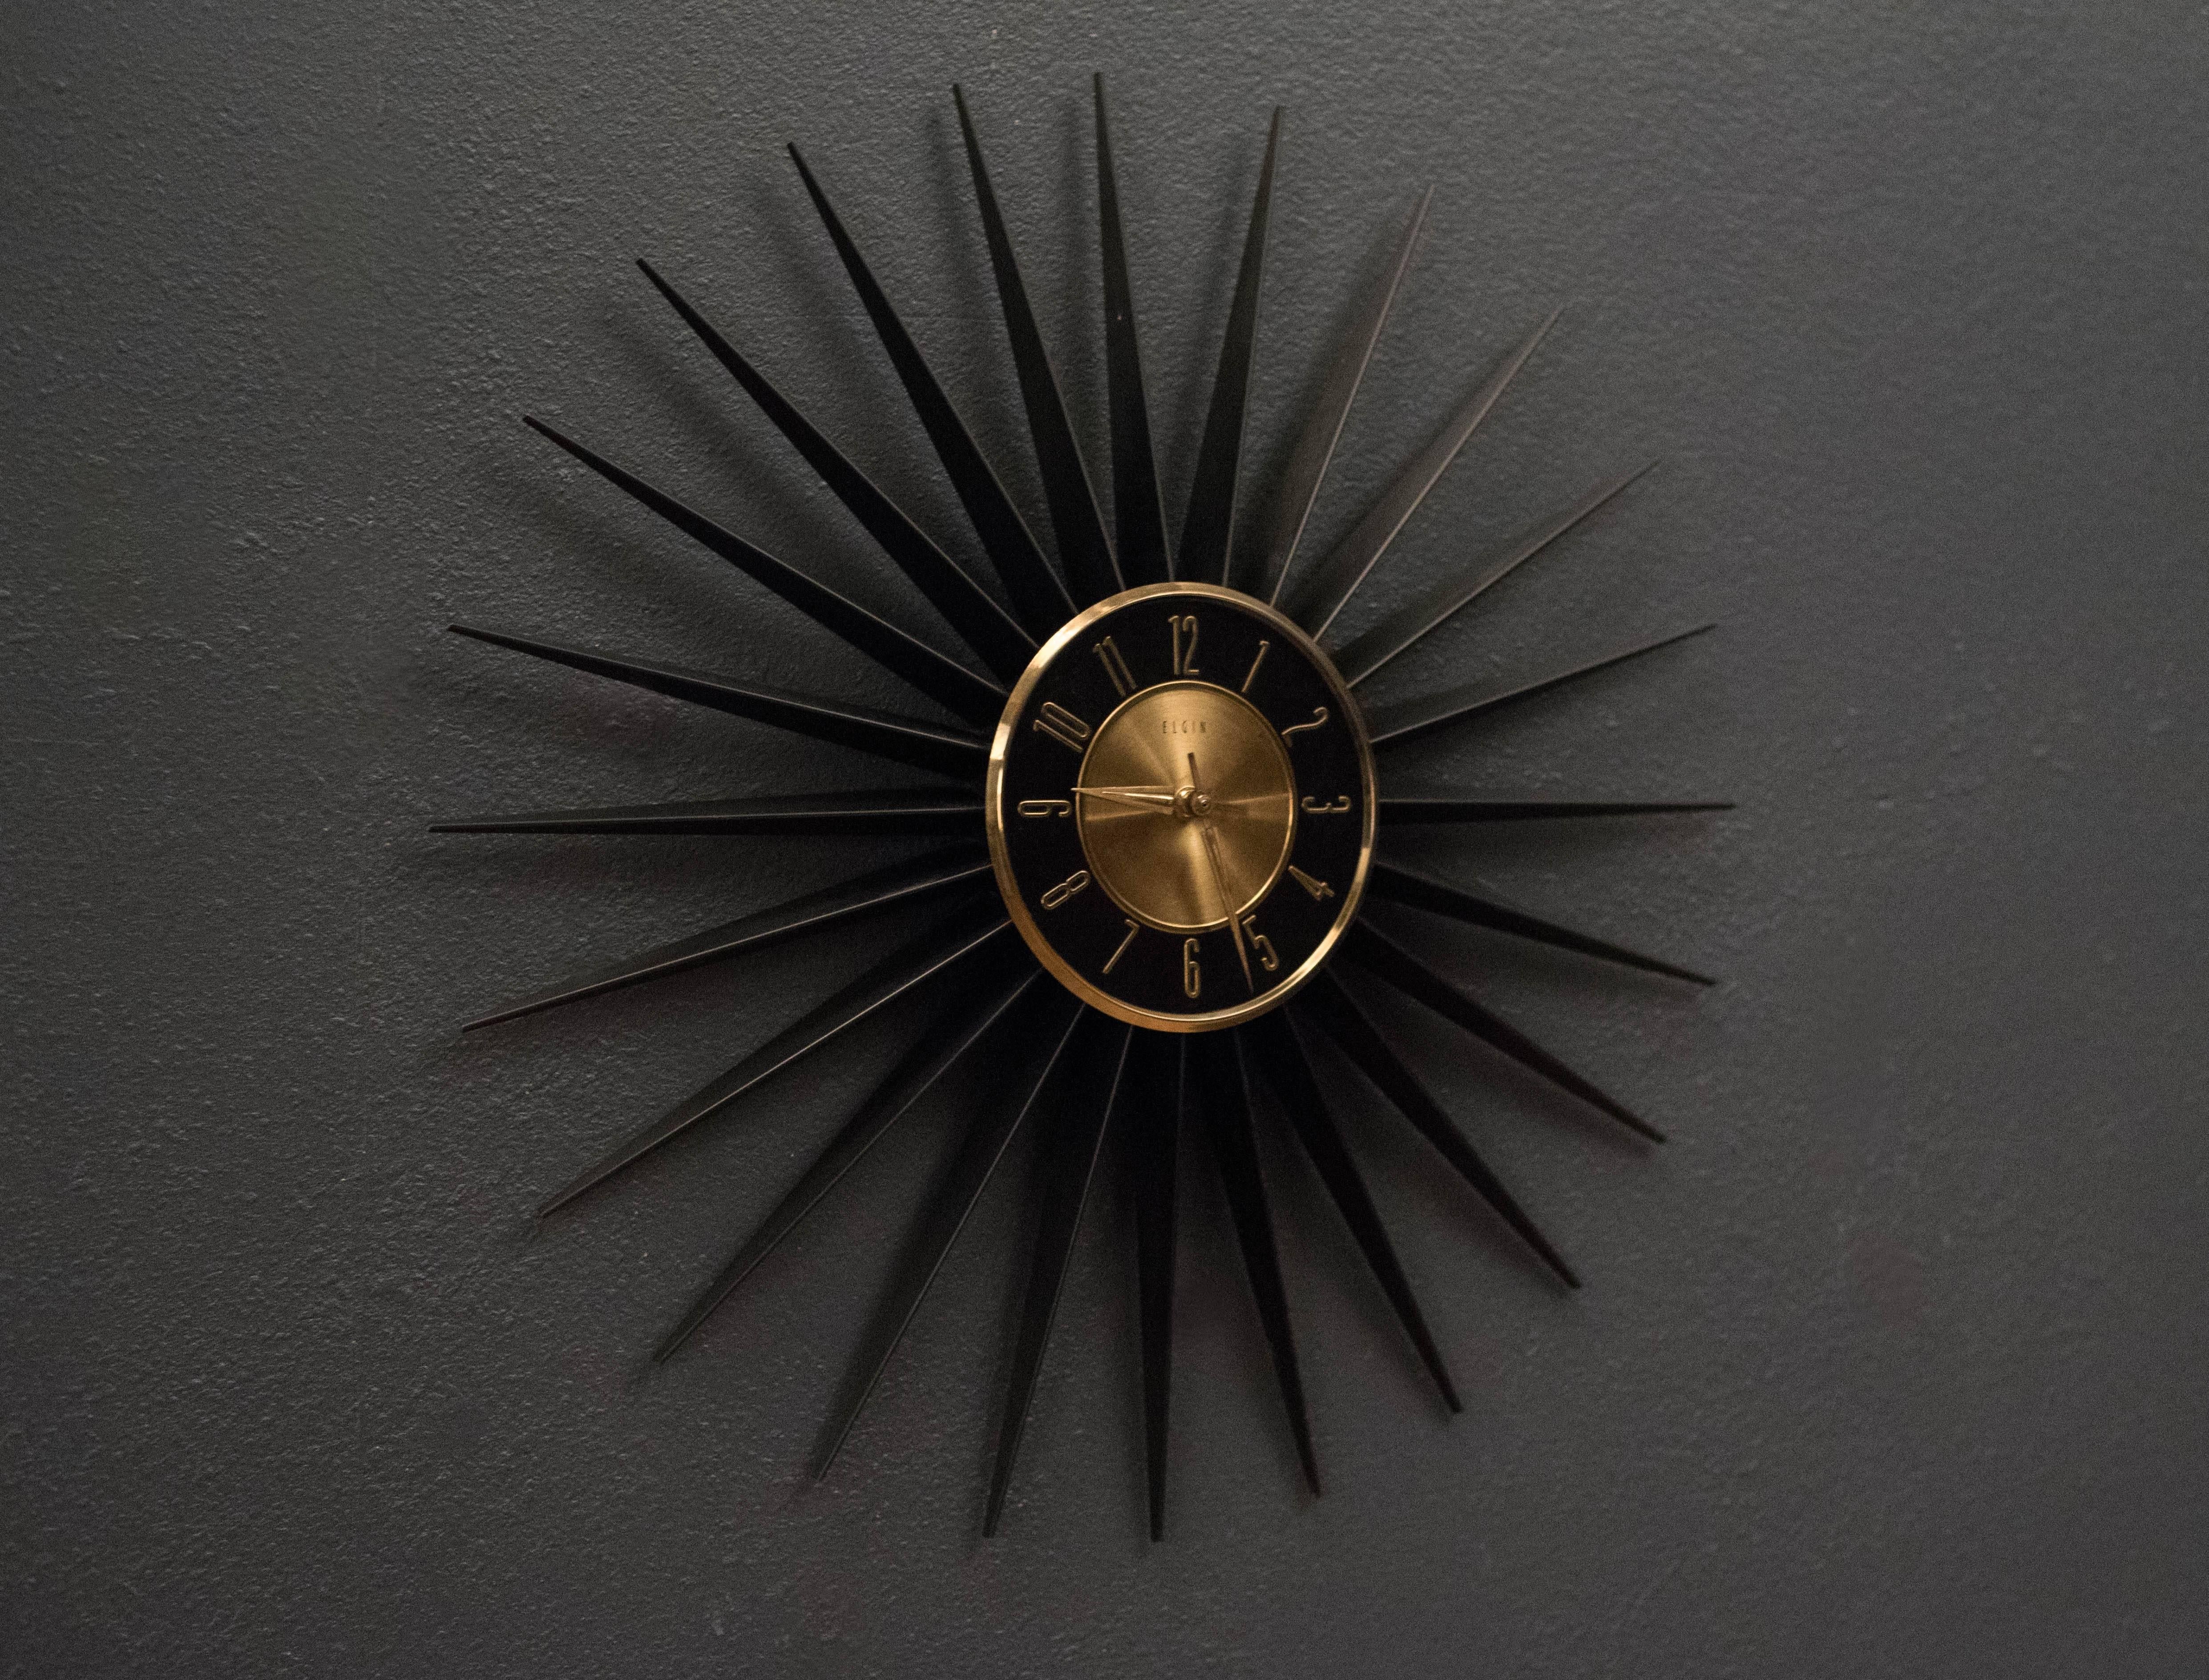 Mid-Century Modern sunburst clock, circa 1960s. This collectible piece is made by Elgin and has a brand new quartz movement. Runs on a single AA battery.